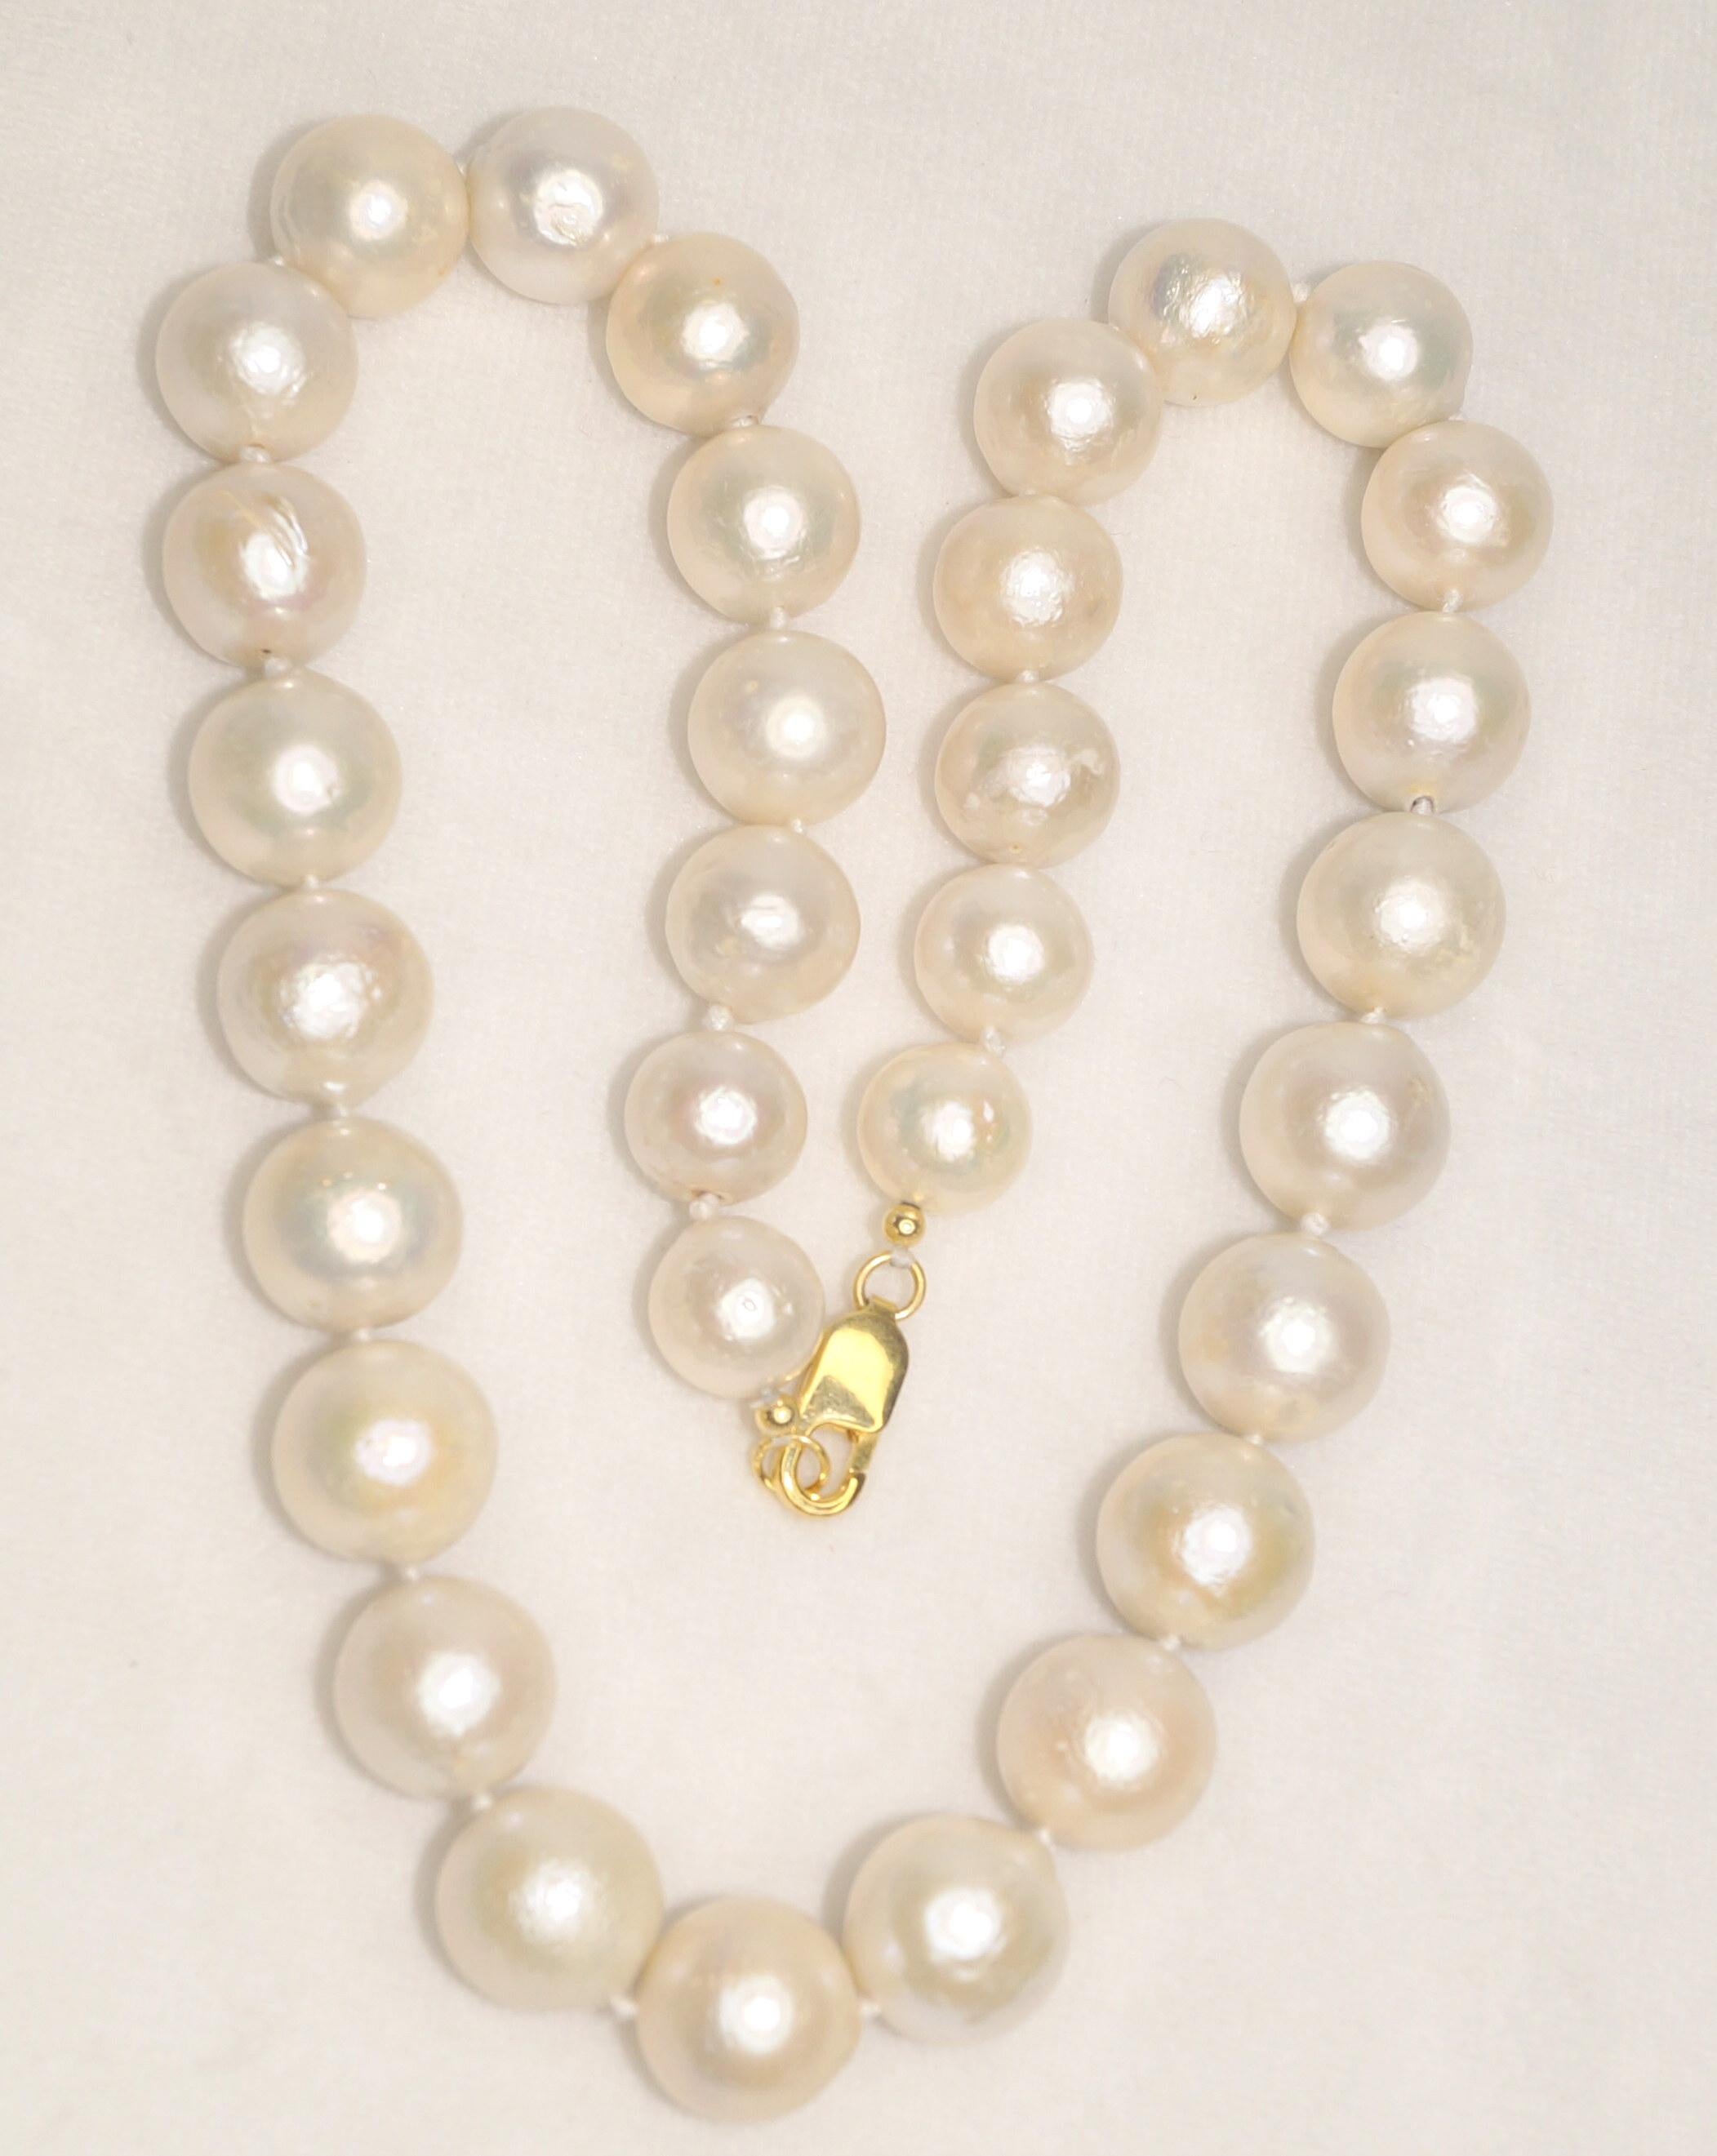 14k Gold South Sea Pearl necklace 12-15mm Big Round Wedding necklace  In New Condition For Sale In Delhi, DL